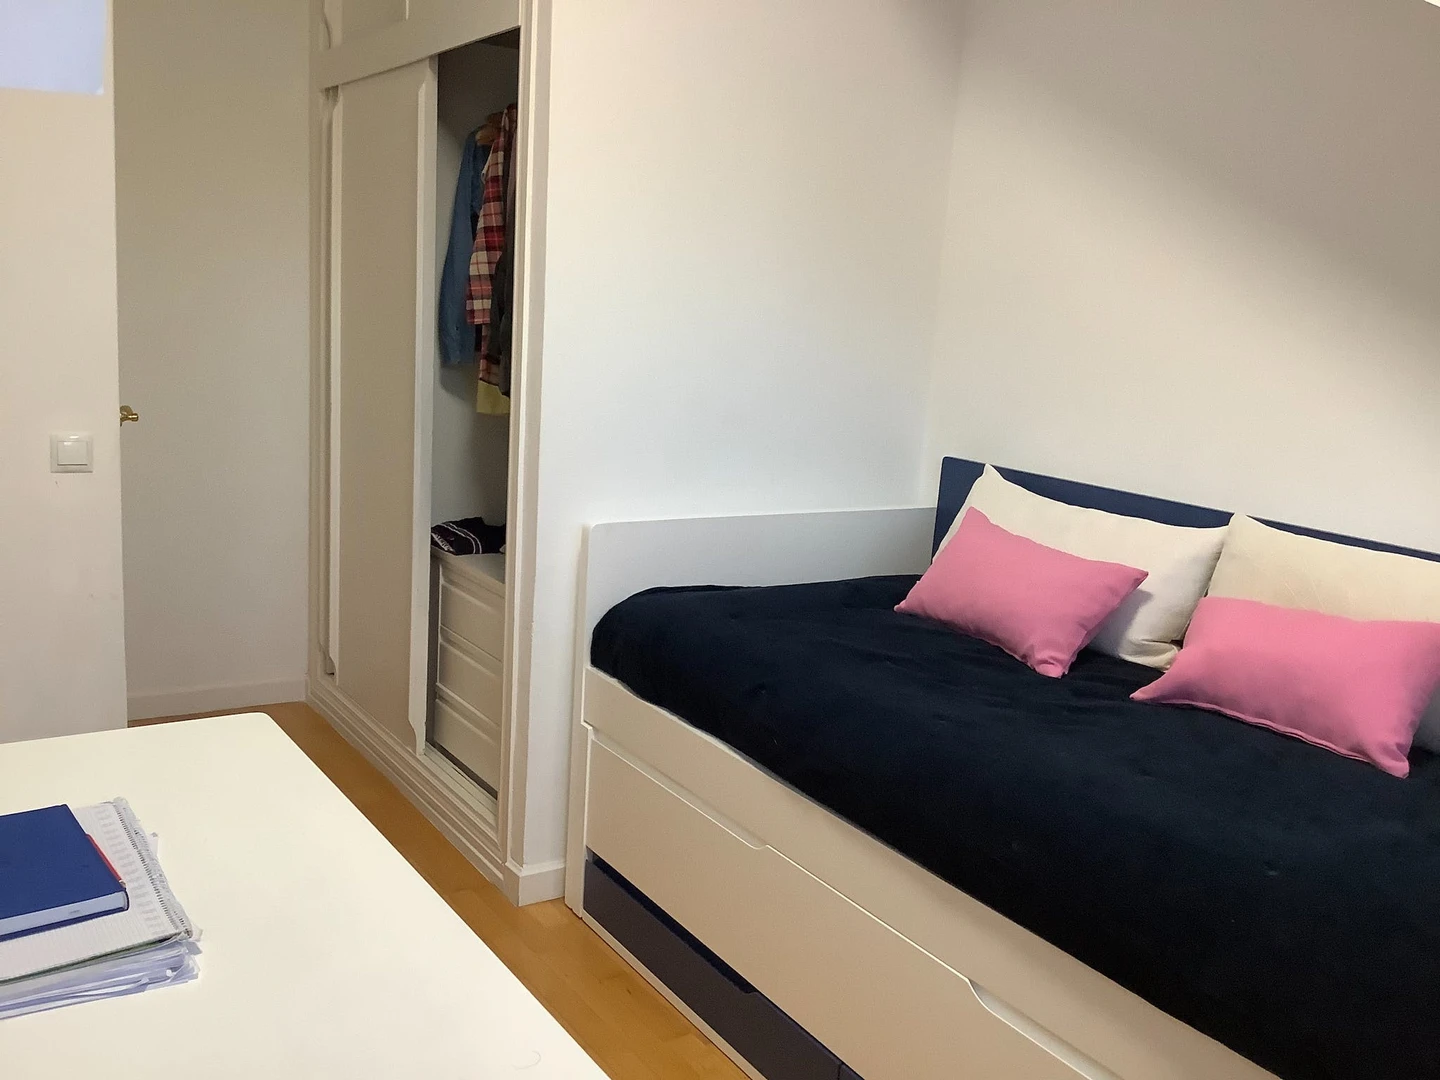 Room for rent in a shared flat in Las Rozas De Madrid